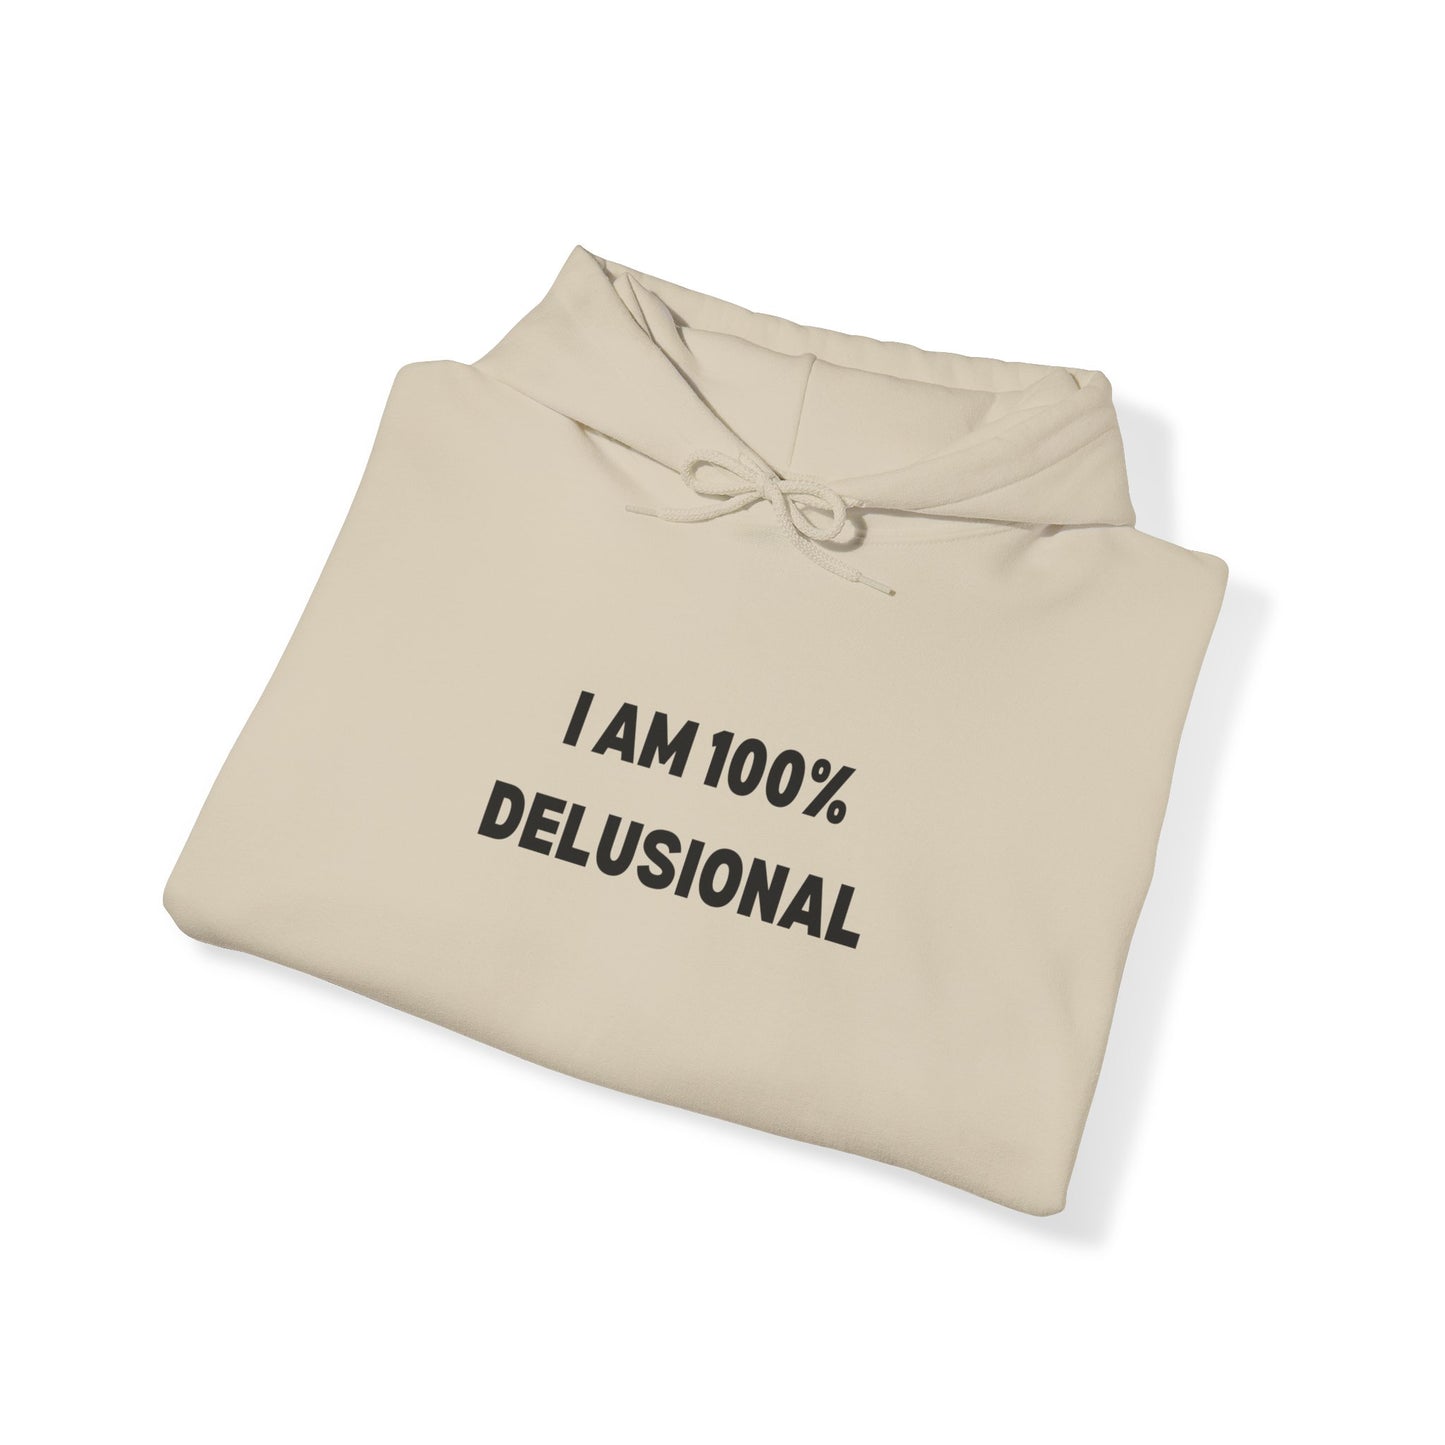 "I am 100% Delusional" - Hoodie